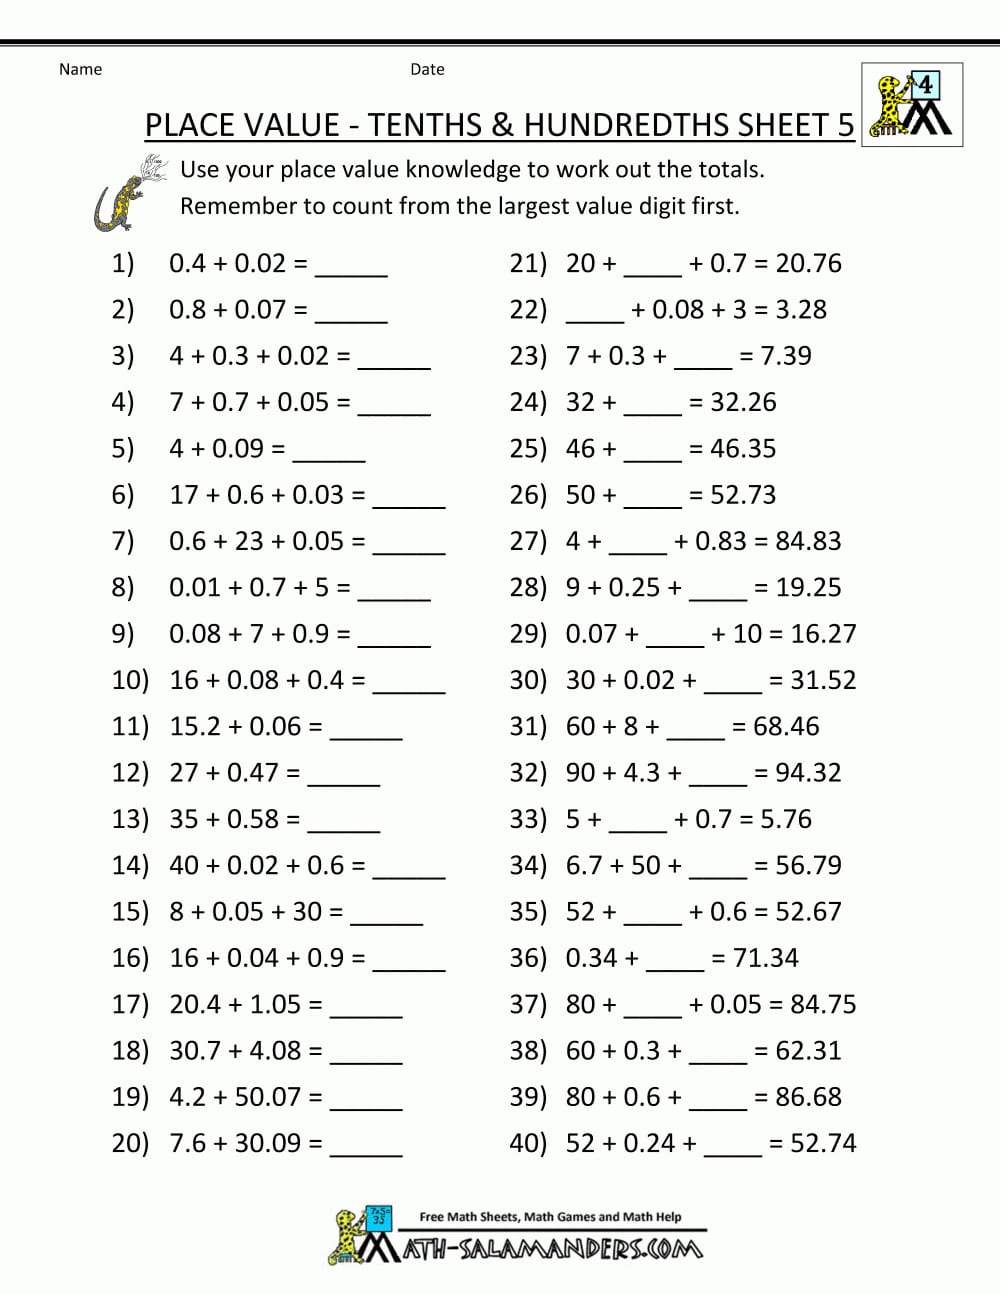 place value worksheets 4th grade db excelcom